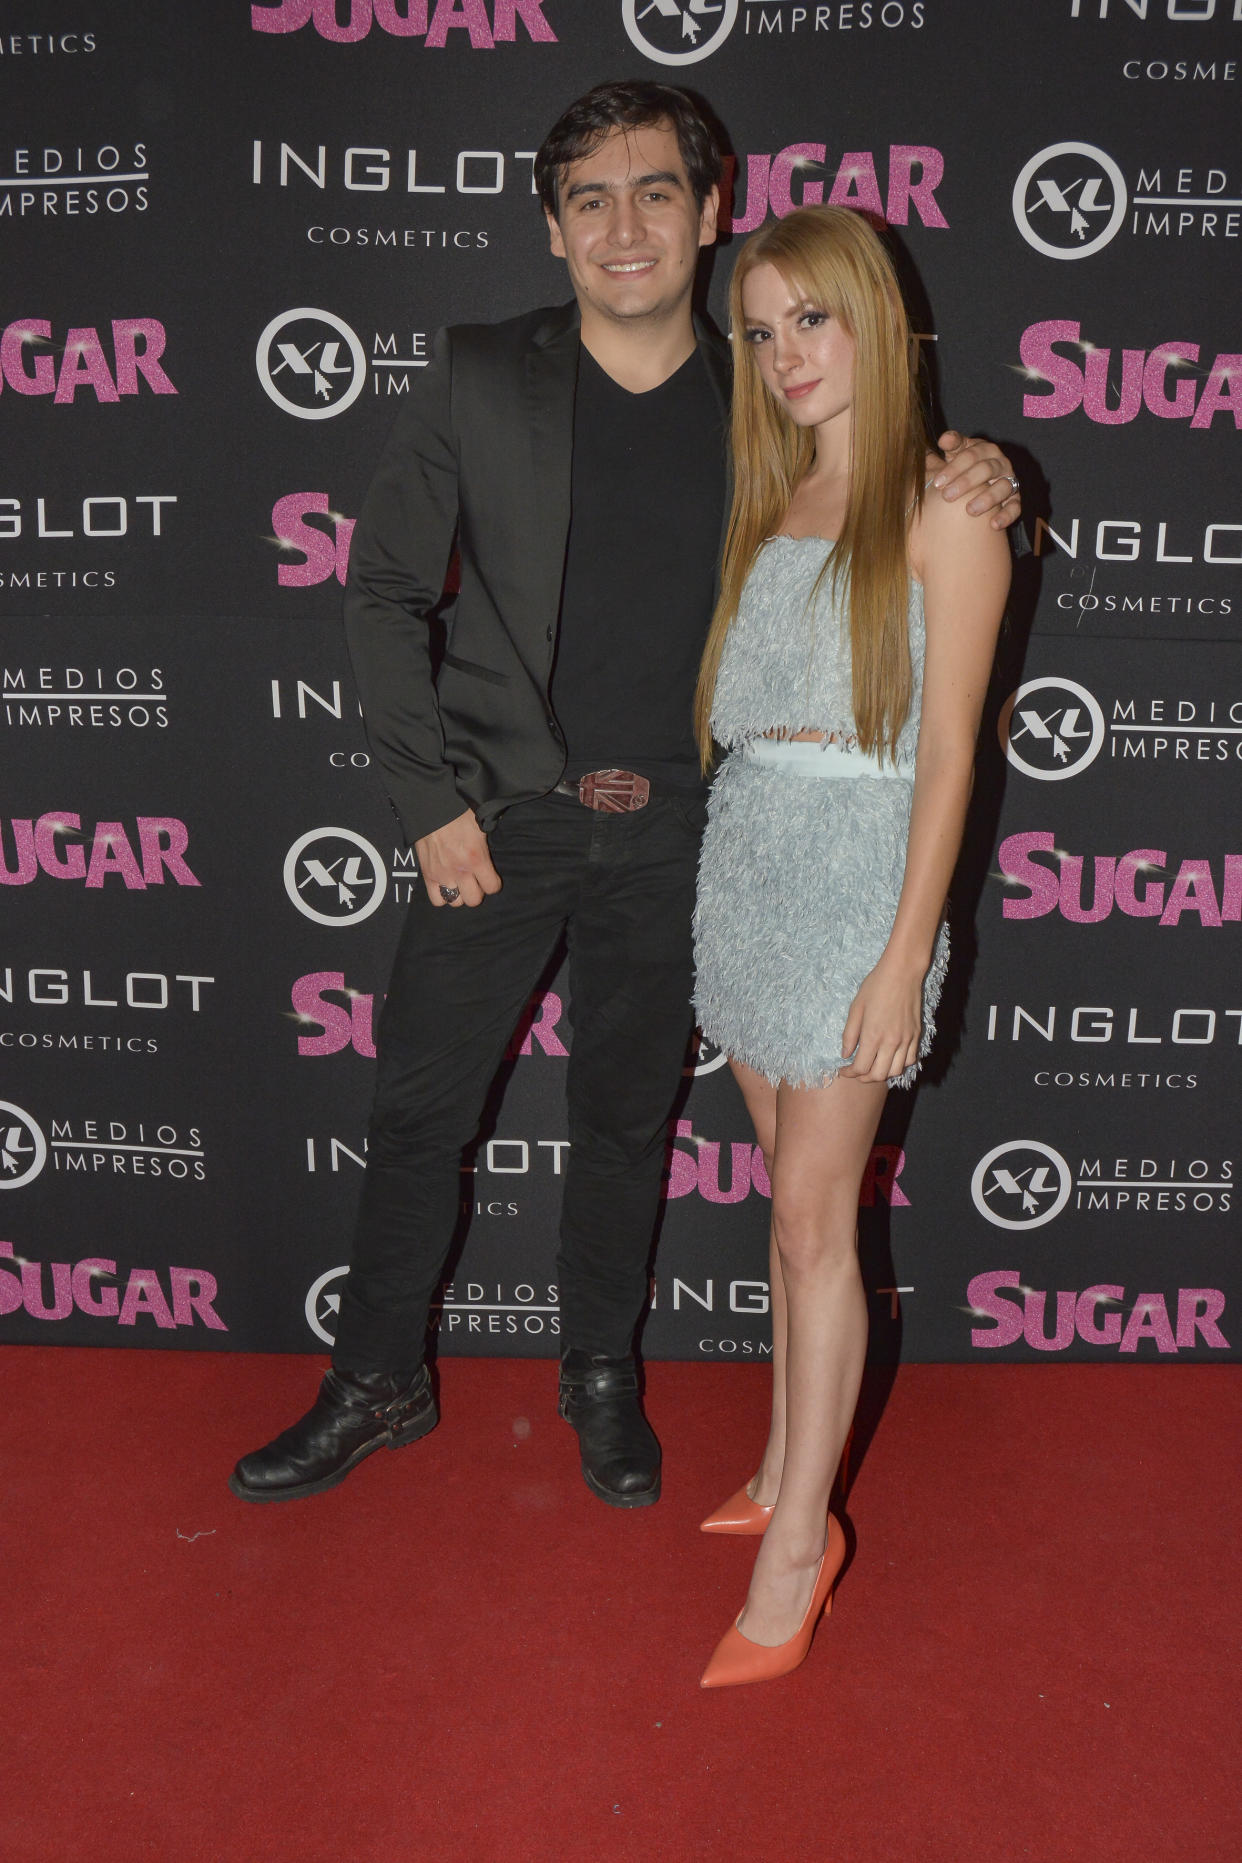 MEXICO CITY, MEXICO - OCTOBER 24: Julian Figueroa and Imelda Garza poses for photos during 'Sugar' Red Carpet at Teatro De Los Insurgentes on October 24, 2019 in Mexico City, Mexico. (Photo by Medios y Media/Getty Images)